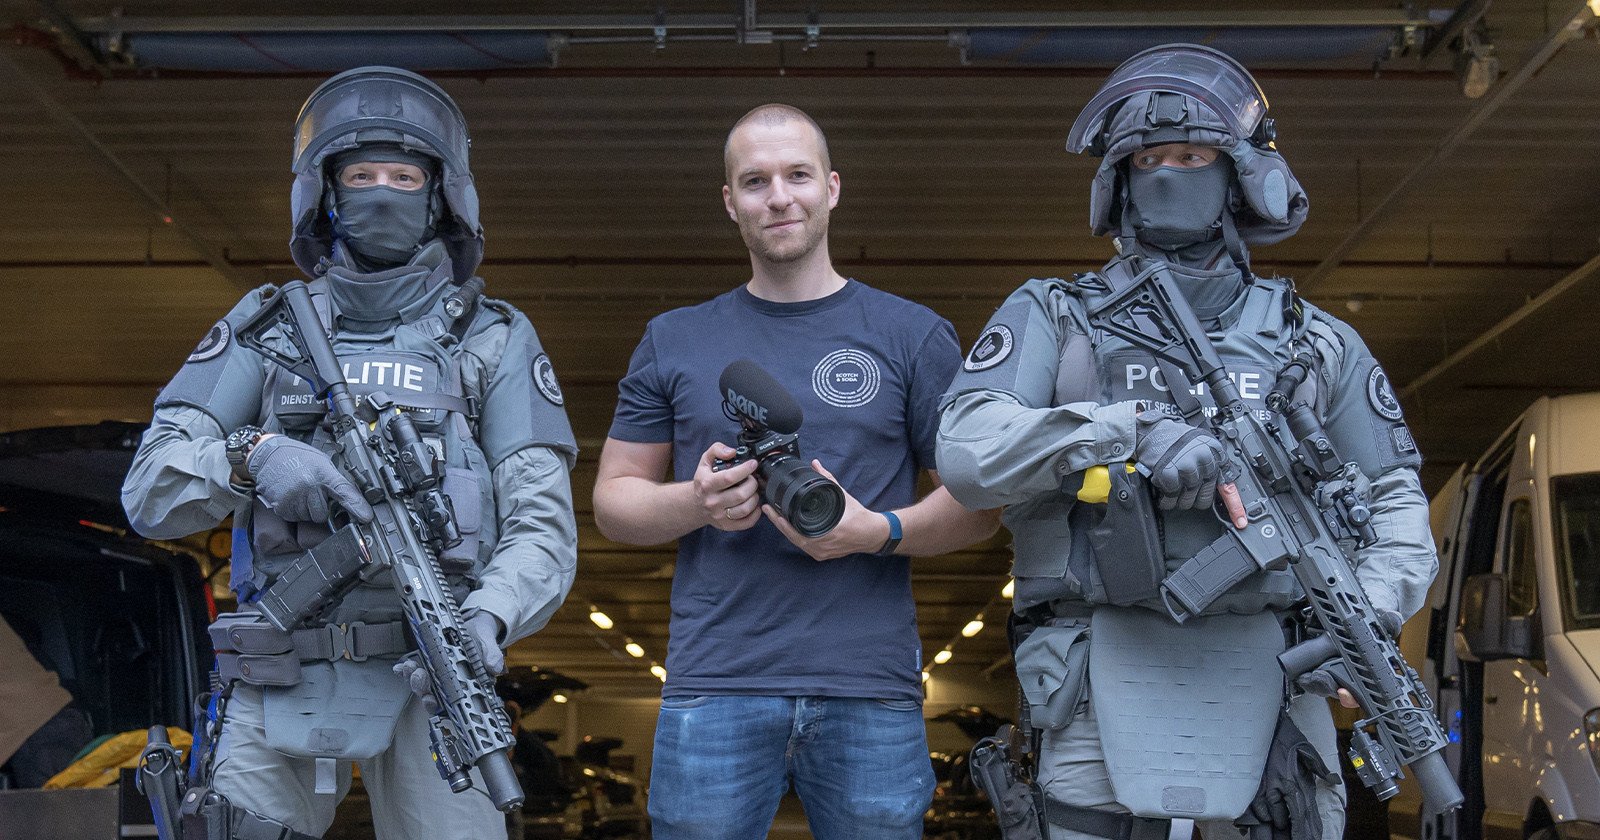  dutch police officer combines law enforcement photography 